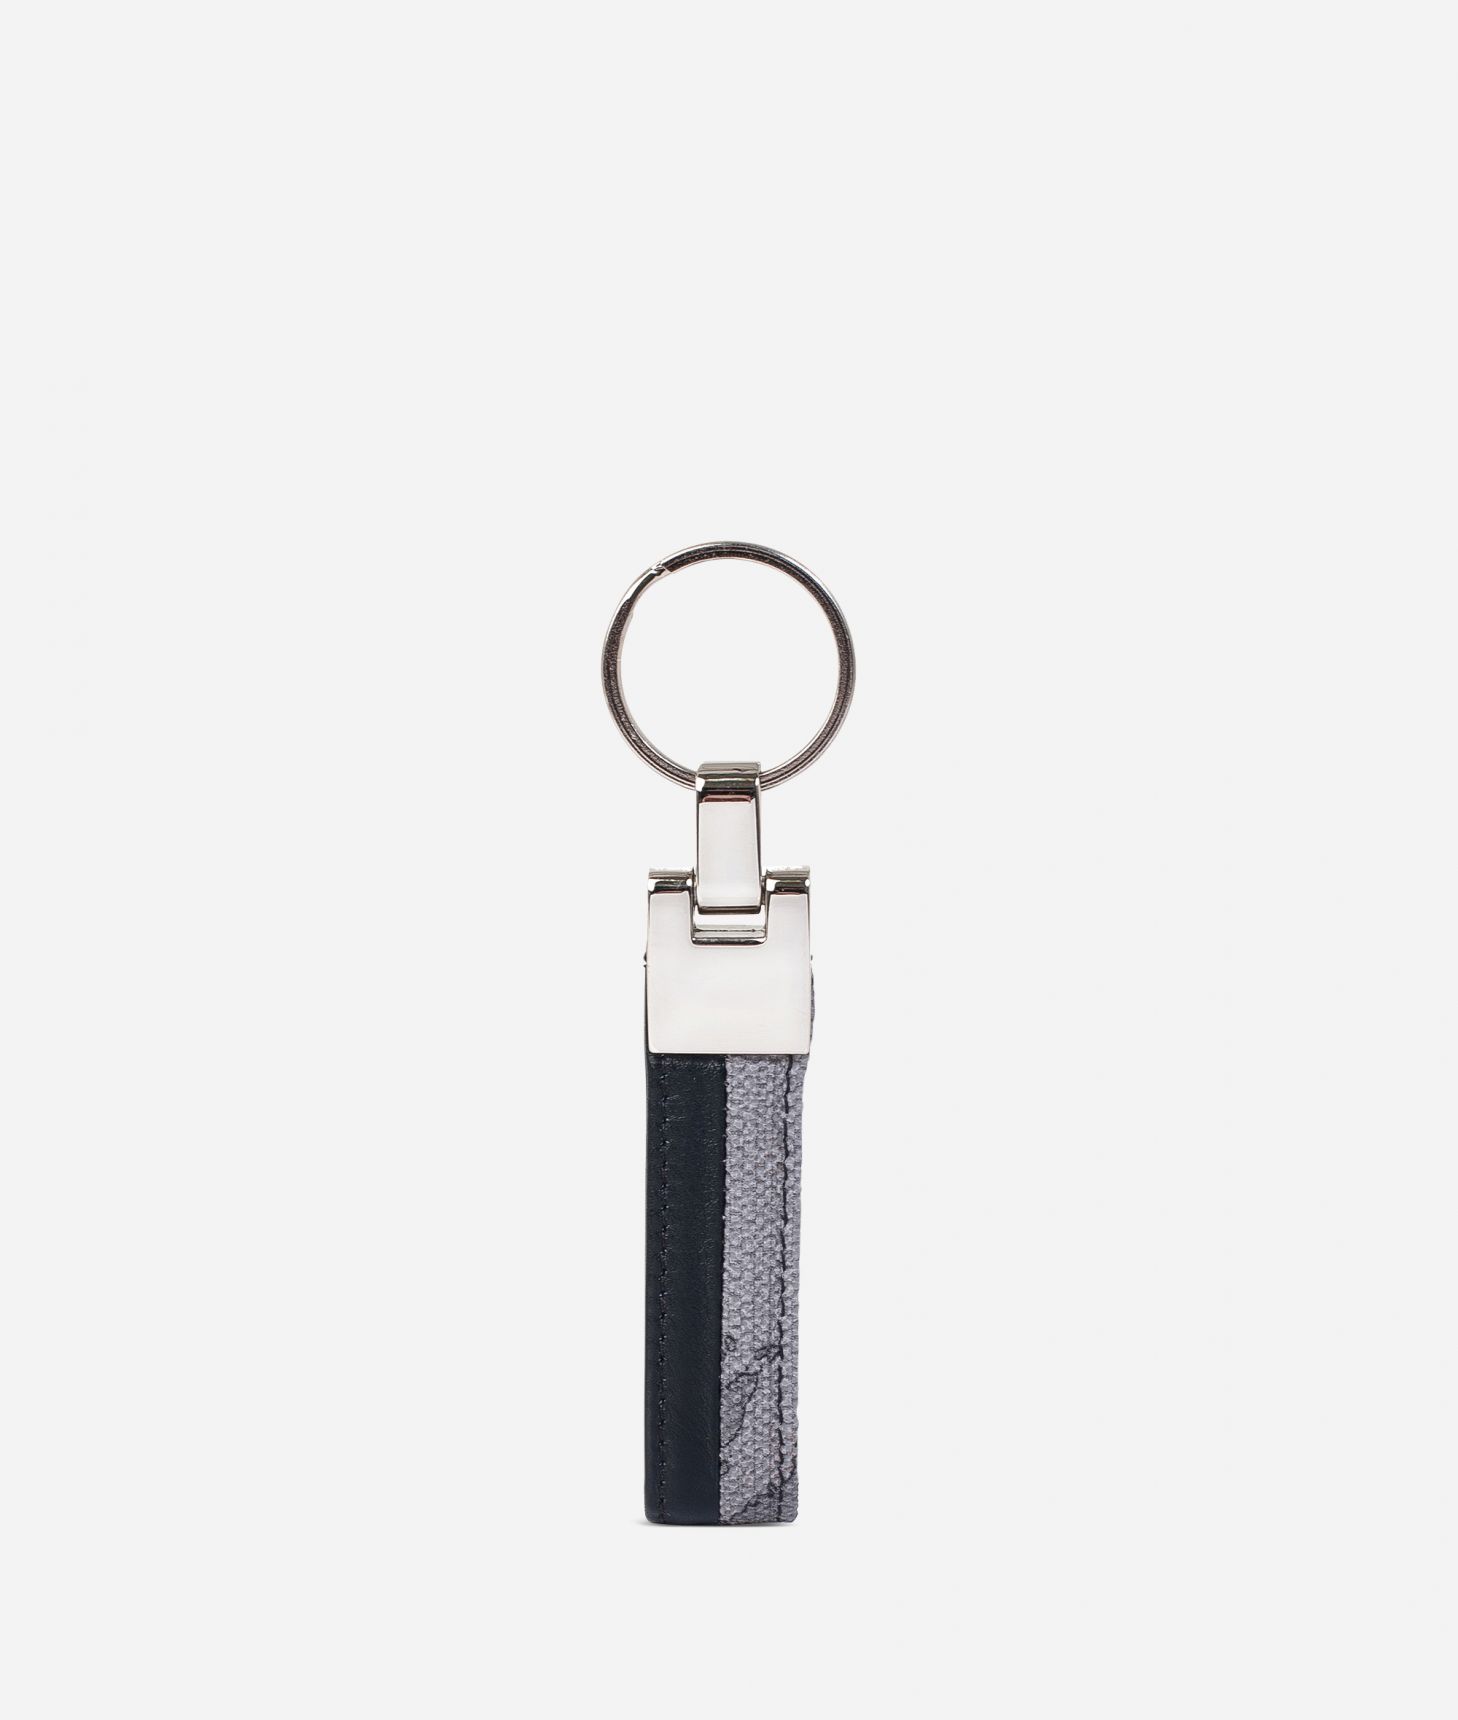 Key ring in Geo Dark fabric and leather,front